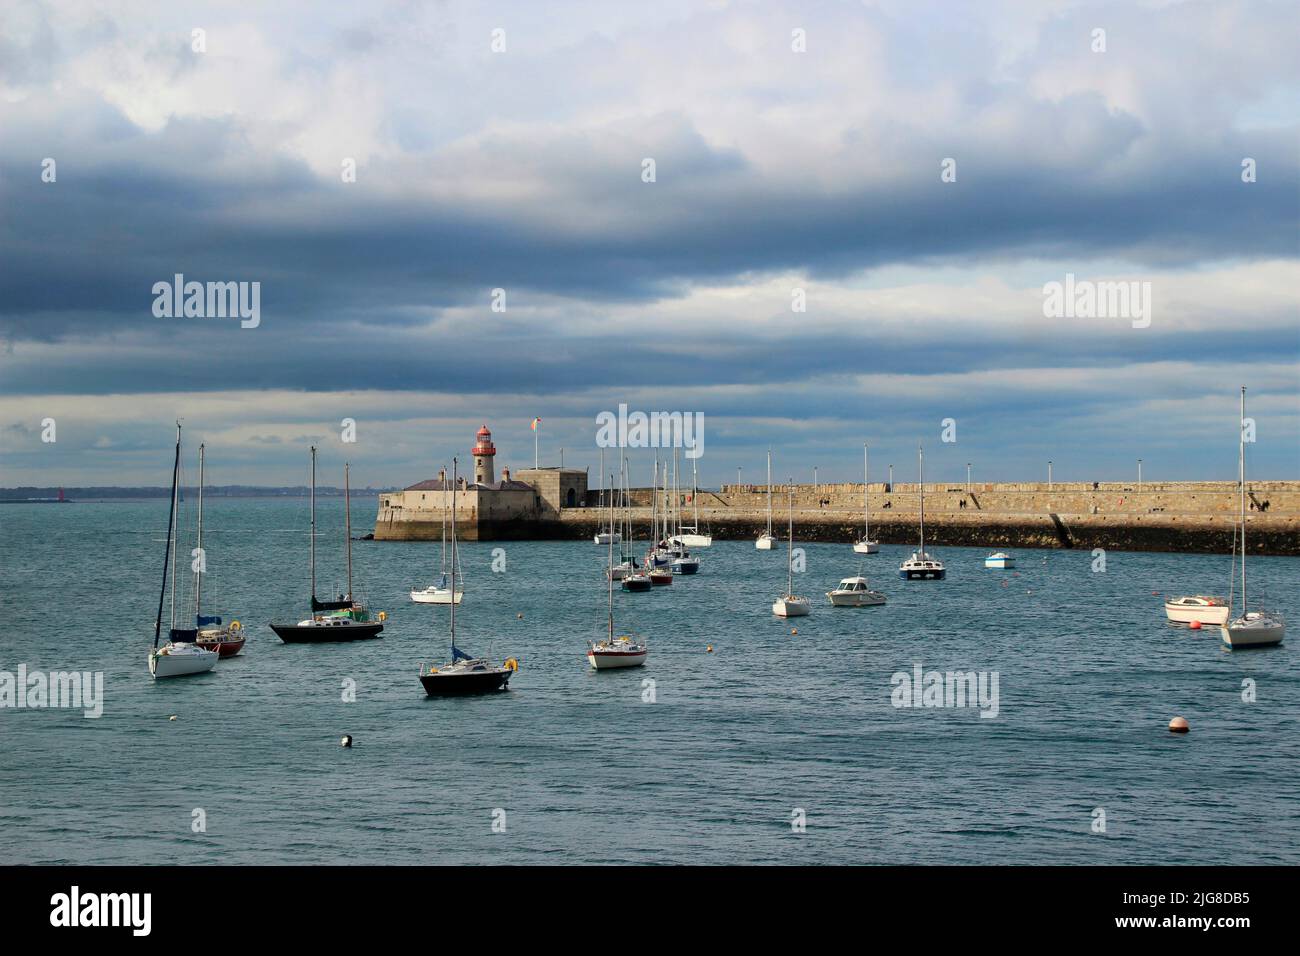 View of lighthouse, boats in Dun Laoghaire, county Dublin, Ireland, thunderstorm atmosphere Stock Photo